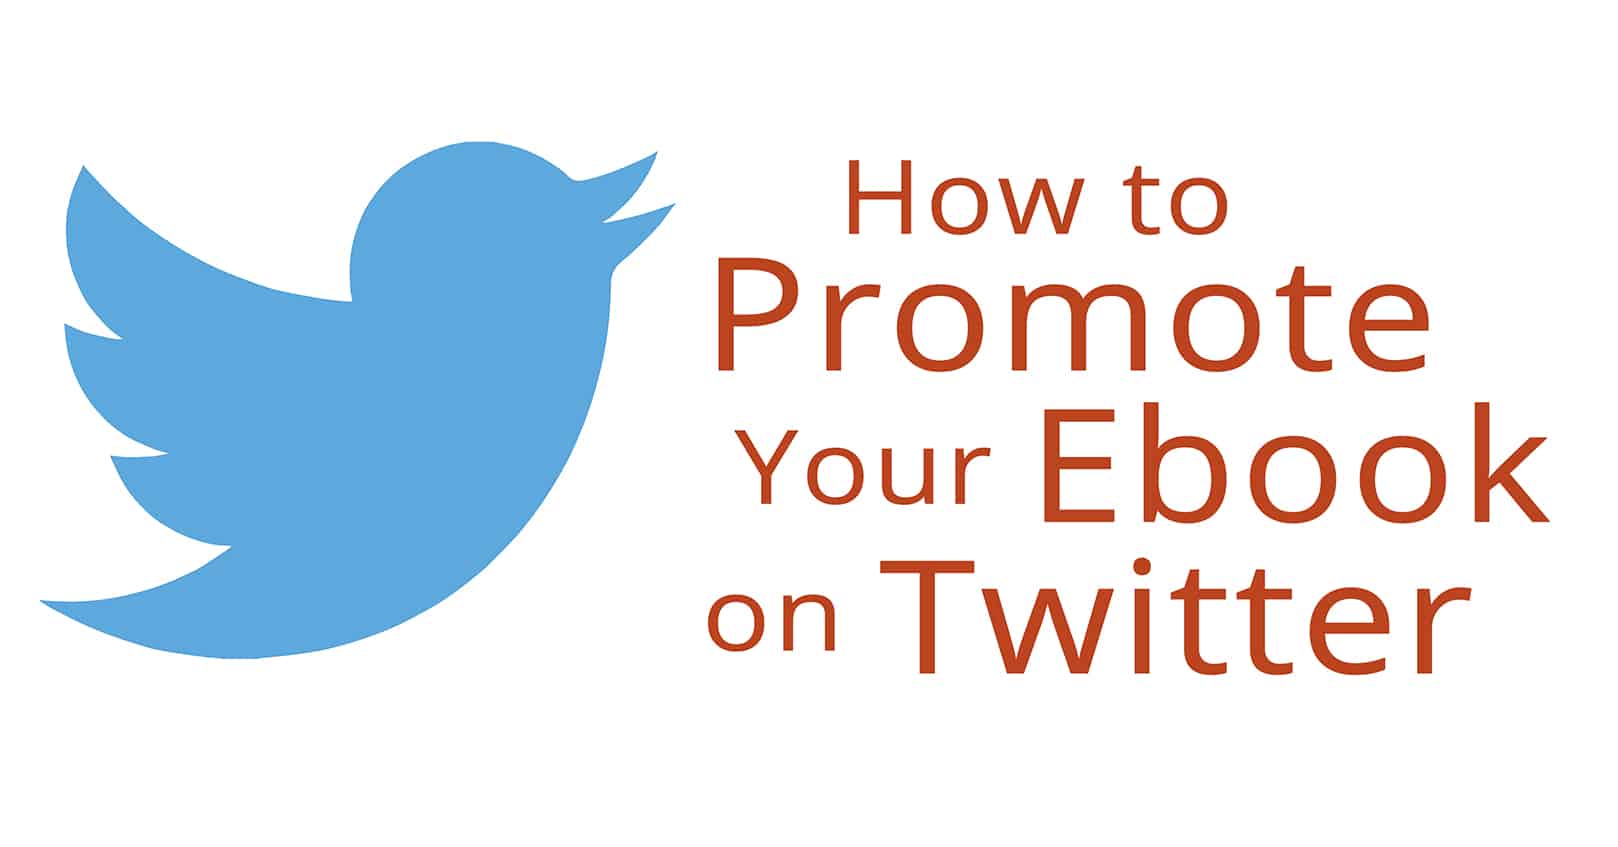 Promote Your Ebook on Twitter